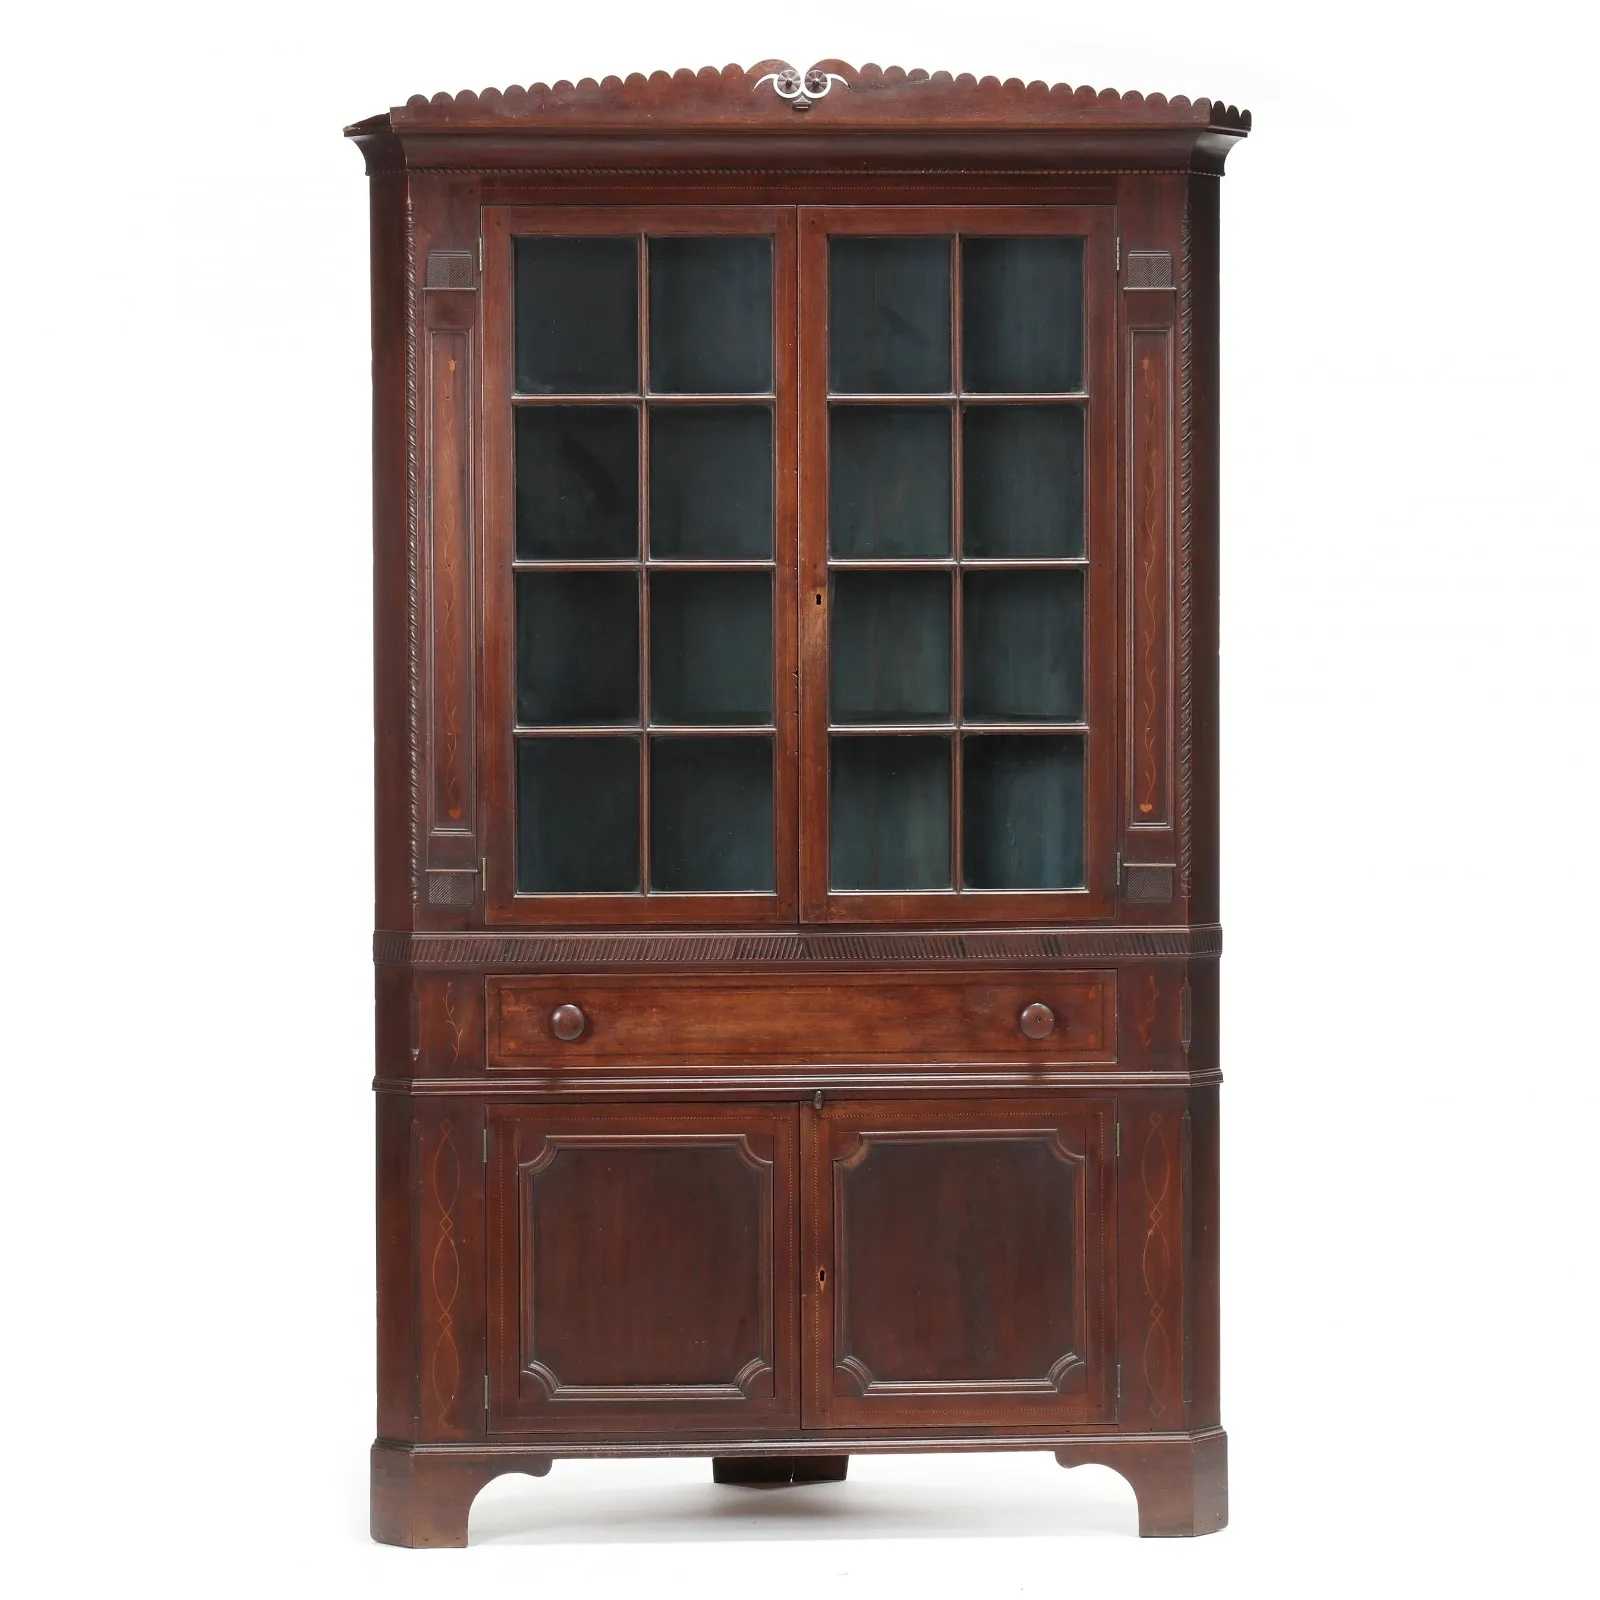 Inlaid walnut corner cupboard made by John Swisegood, which hammered for $33,000 and sold for $41,250 with buyer’s premium at Leland Little on March 15.